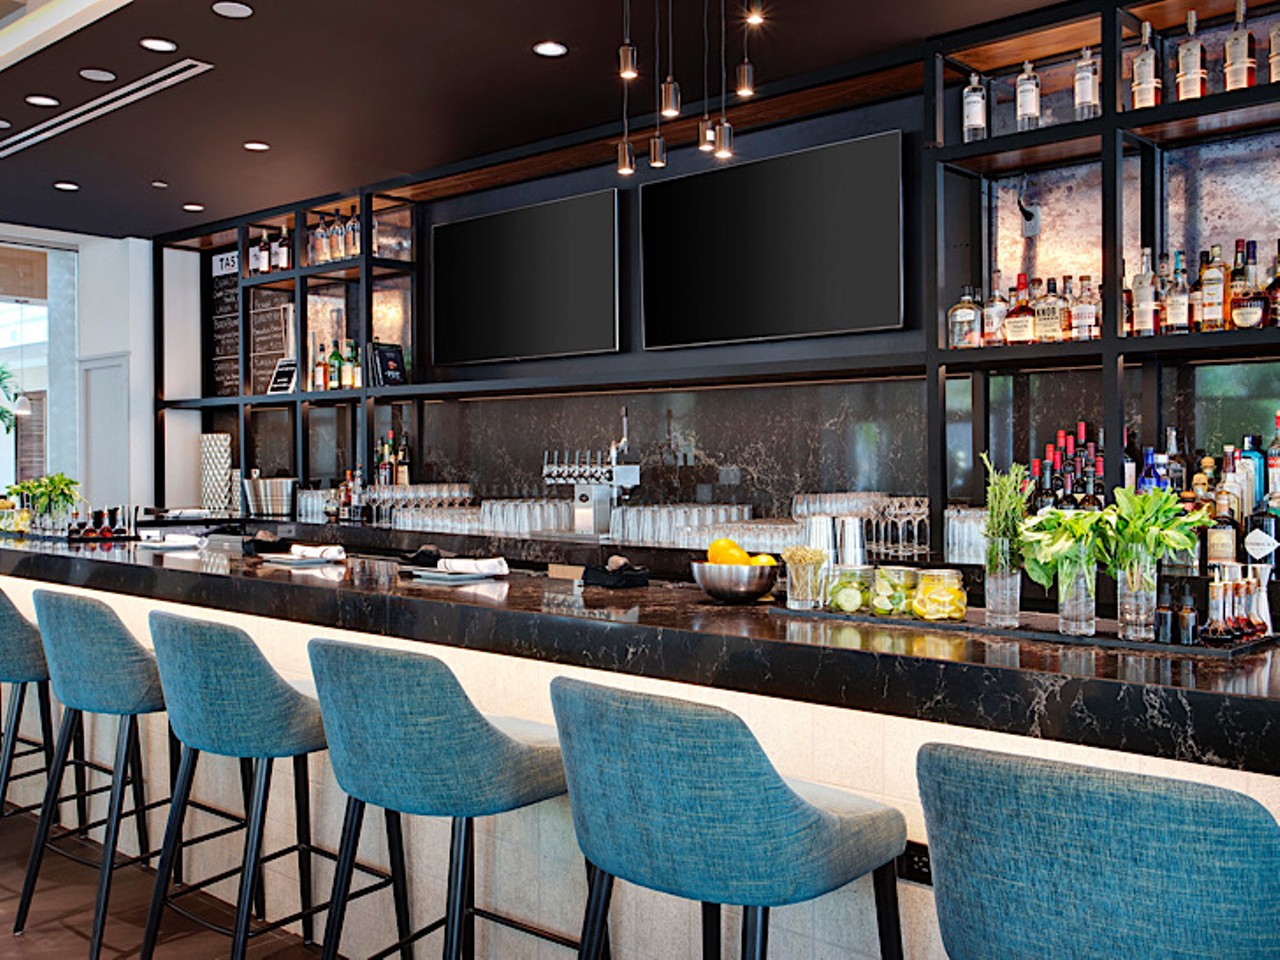 TASTE
513 South Florida Avenue Tampa, FL
In need of a quiet drink in bustling downtown Tampa? TASTE gives you an escape with its bar tucked inside of the Hilton Hotel focusing on exclusively Tampa ingredients and drinks, as their beer list has almost all locally brewed beers. 
Photo via Taste/tastedowntowntampa.com